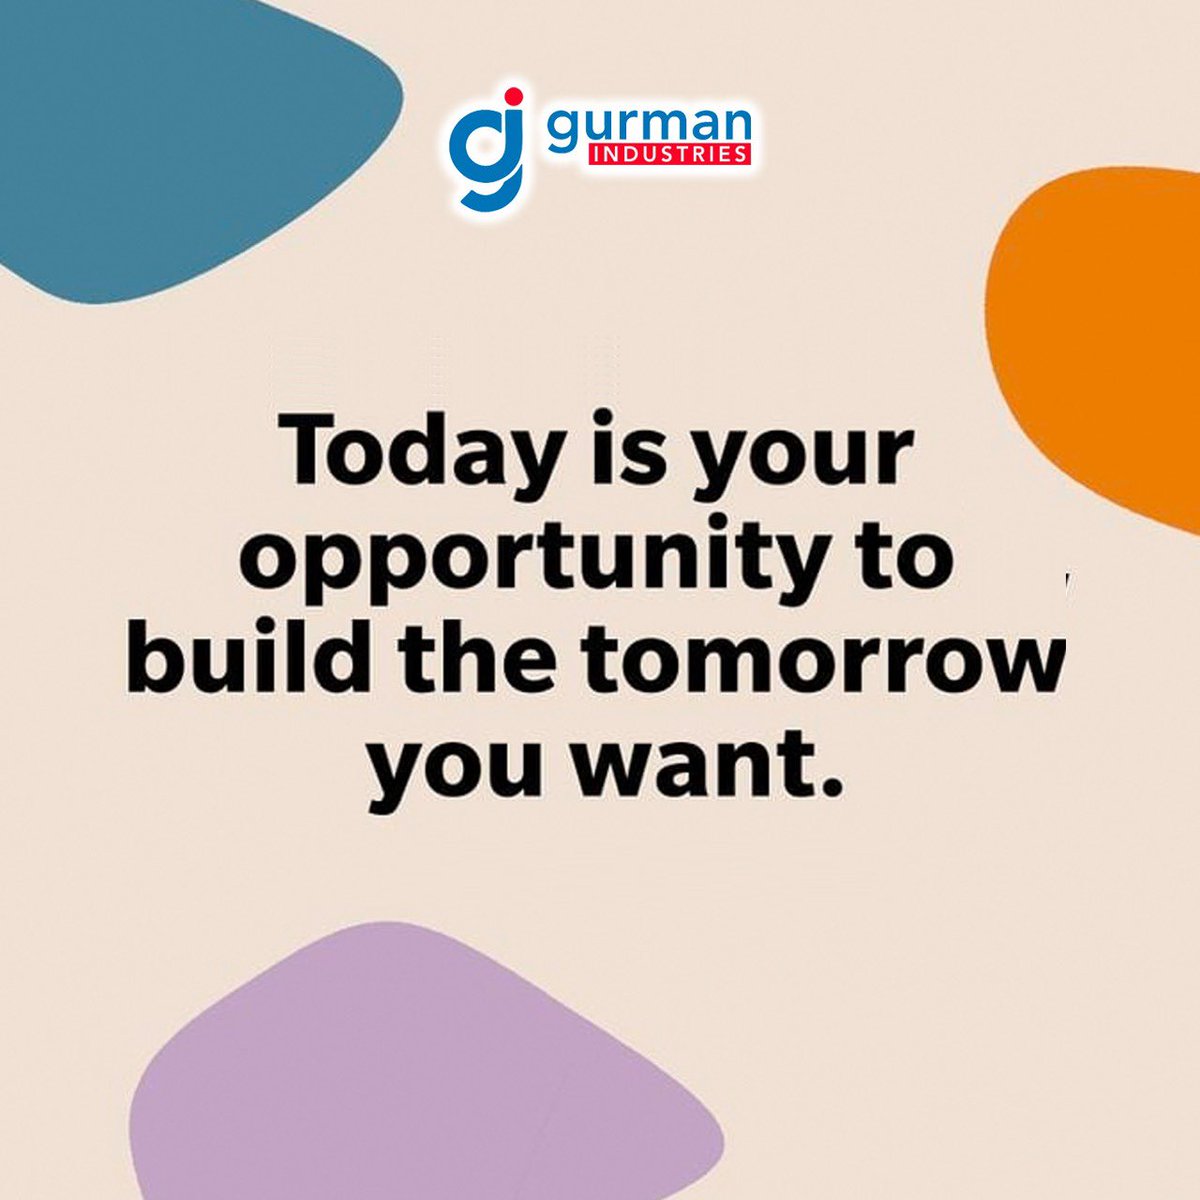 #Today #is #your #opportunity #to #build #the #tomorrow #you #want #GurmanIndustries